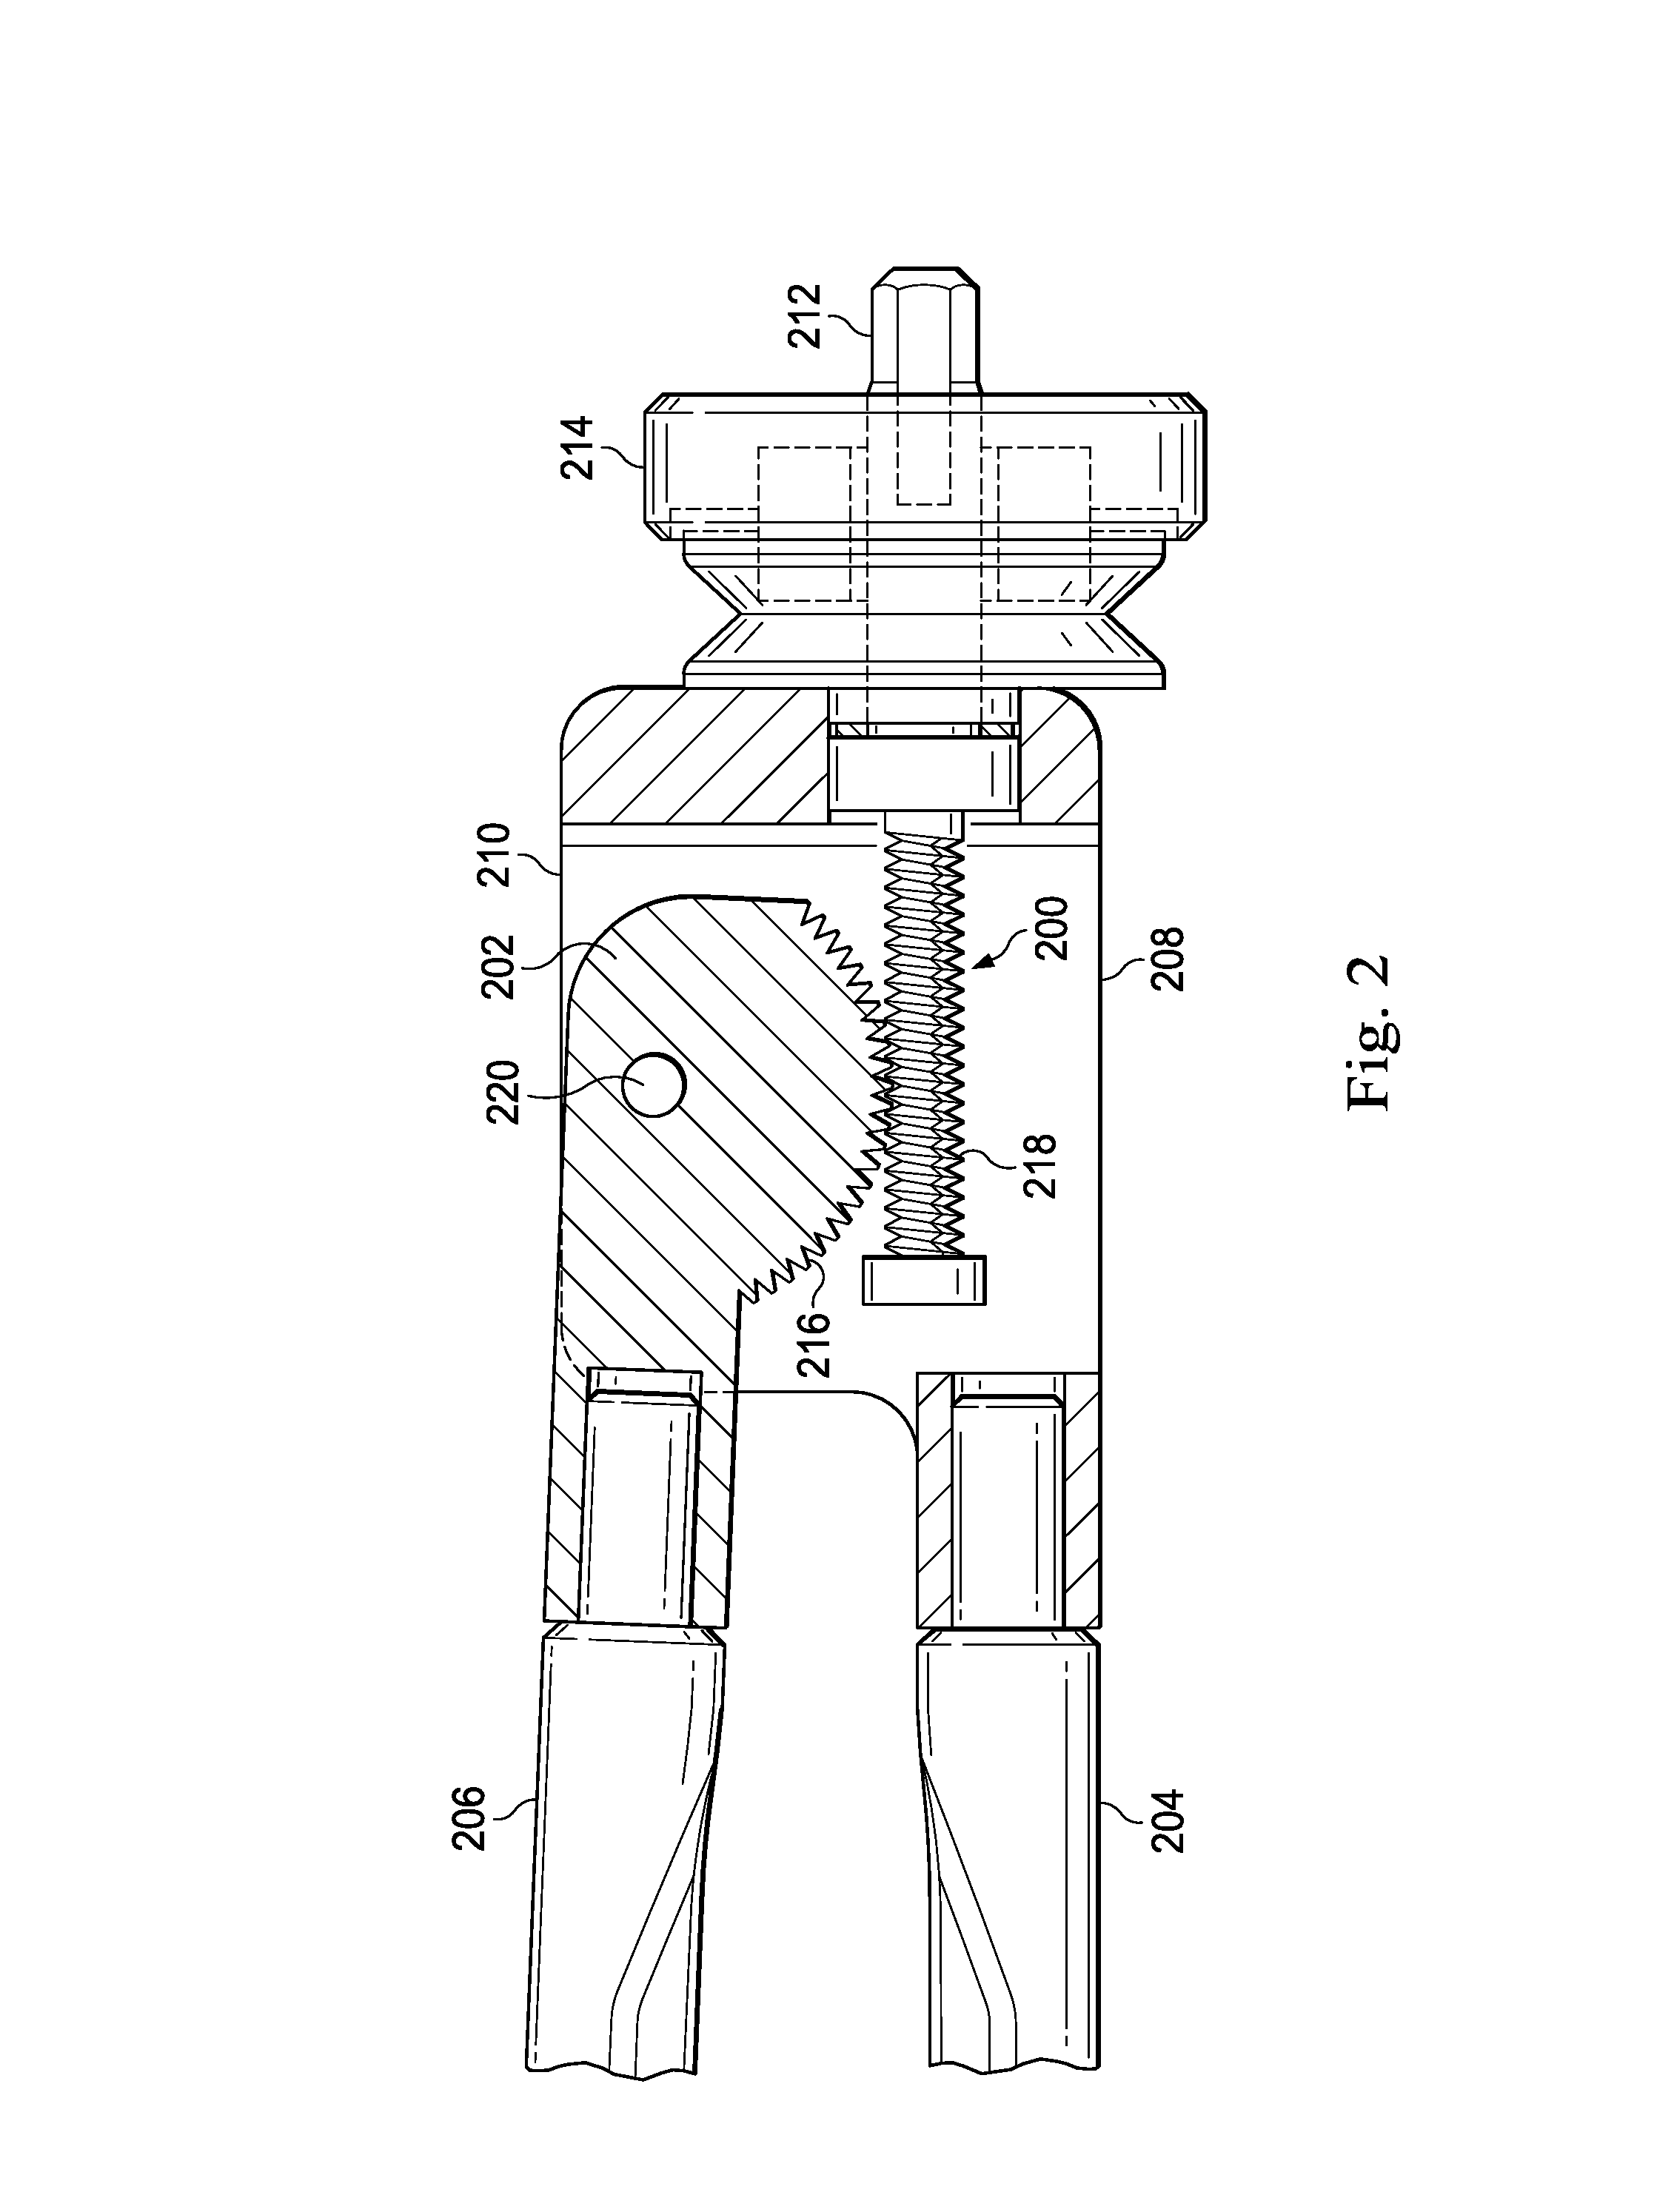 Handleless clamping device